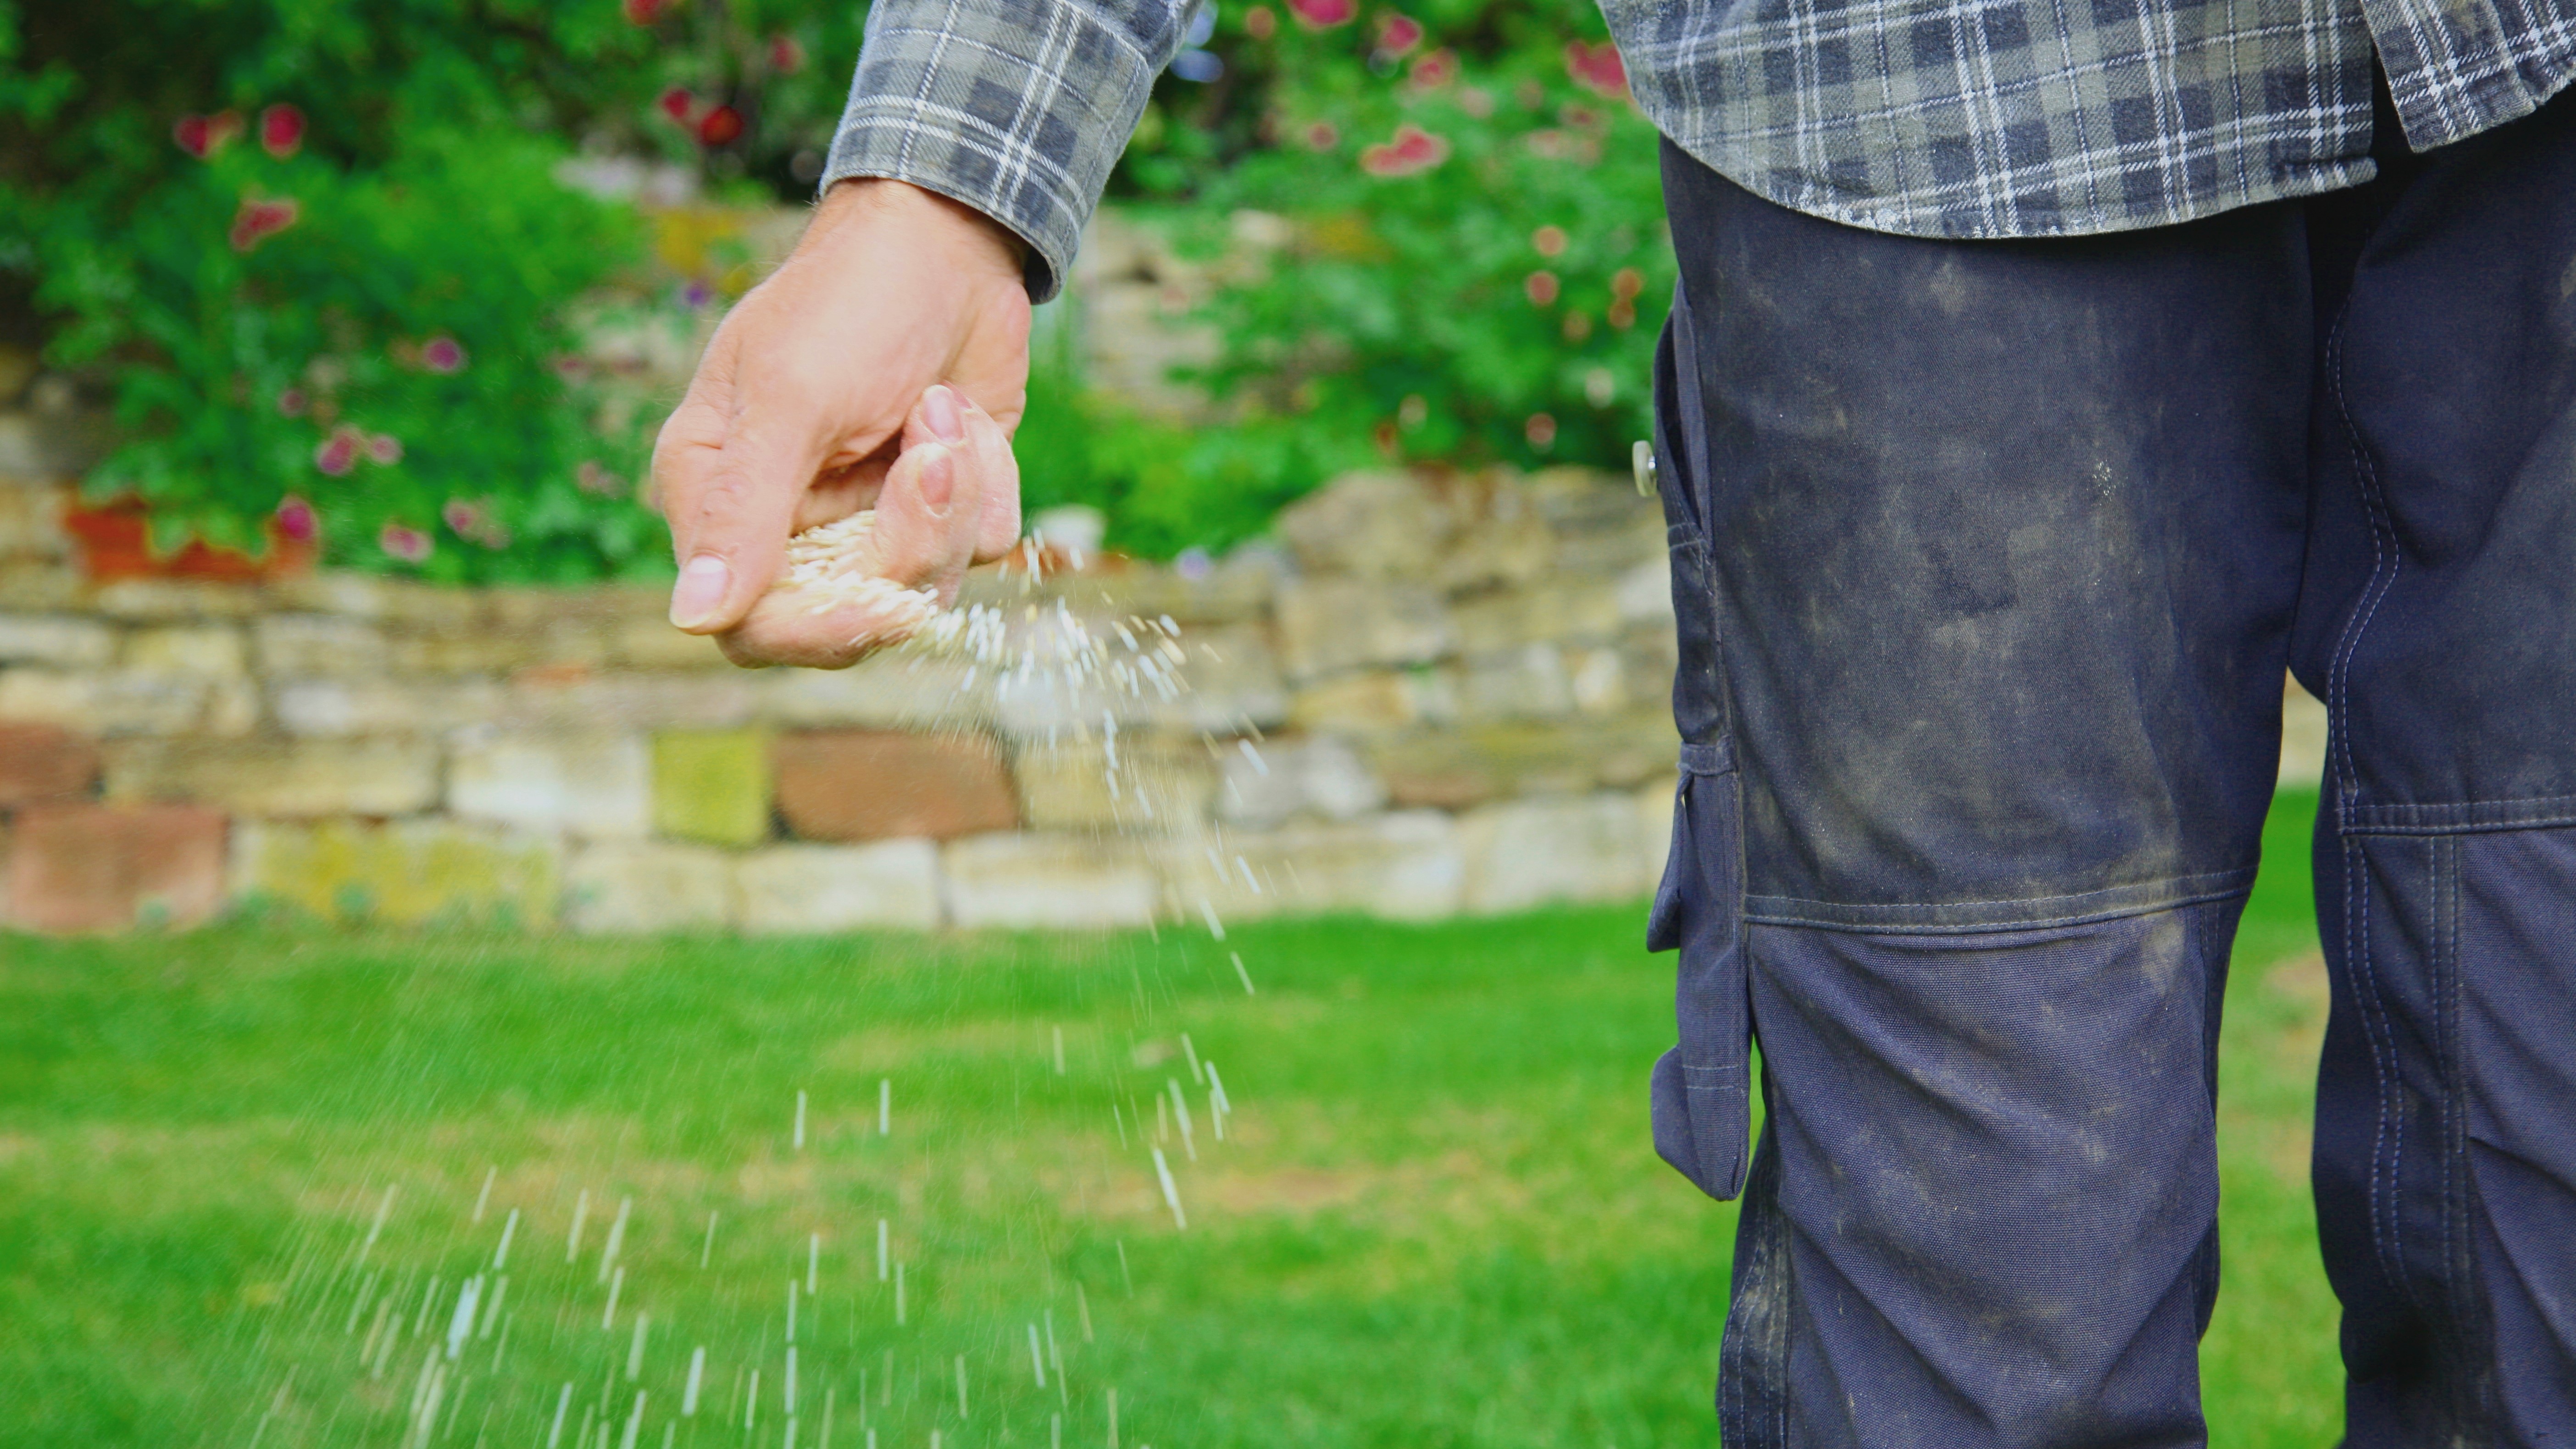 3 Mistakes That You Could Make if You Try to Fertilize Your Own Lawn